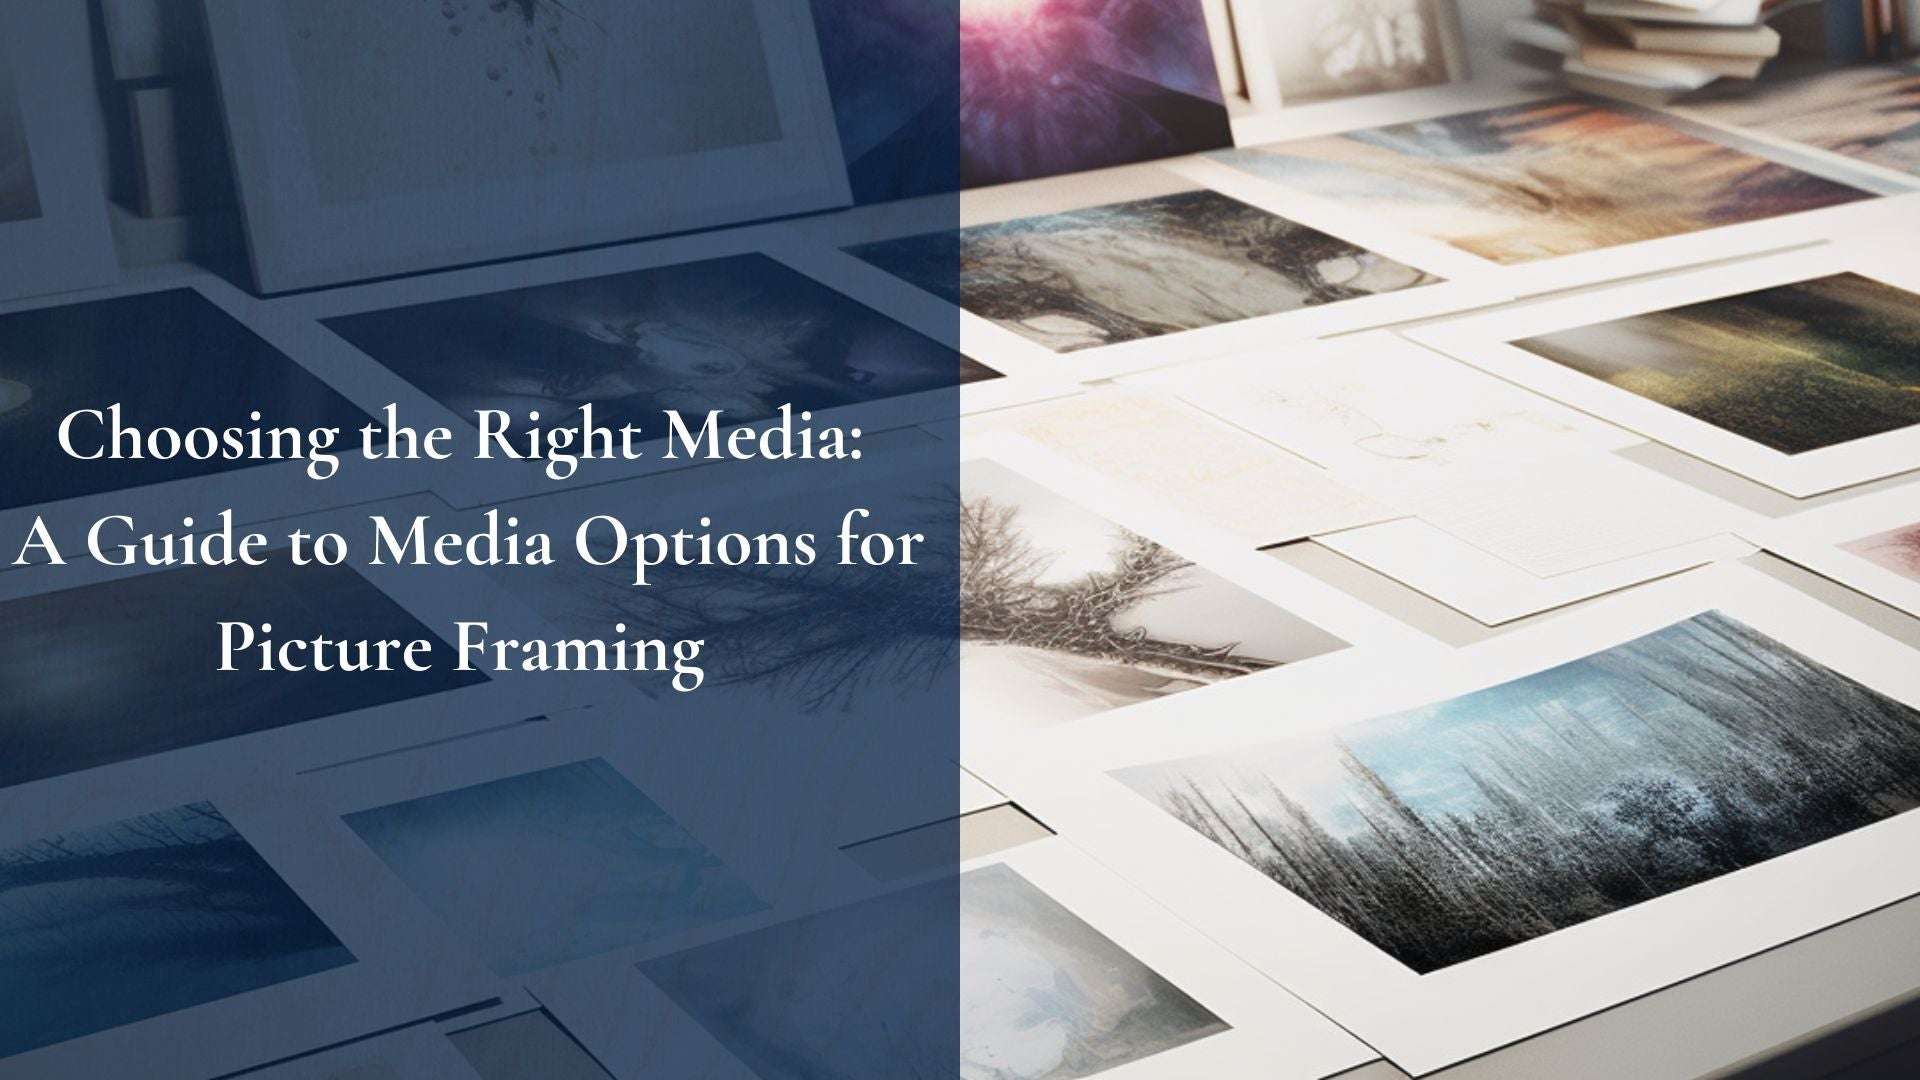 Choosing the Right Media: A Guide to Media Options for Picture Framing